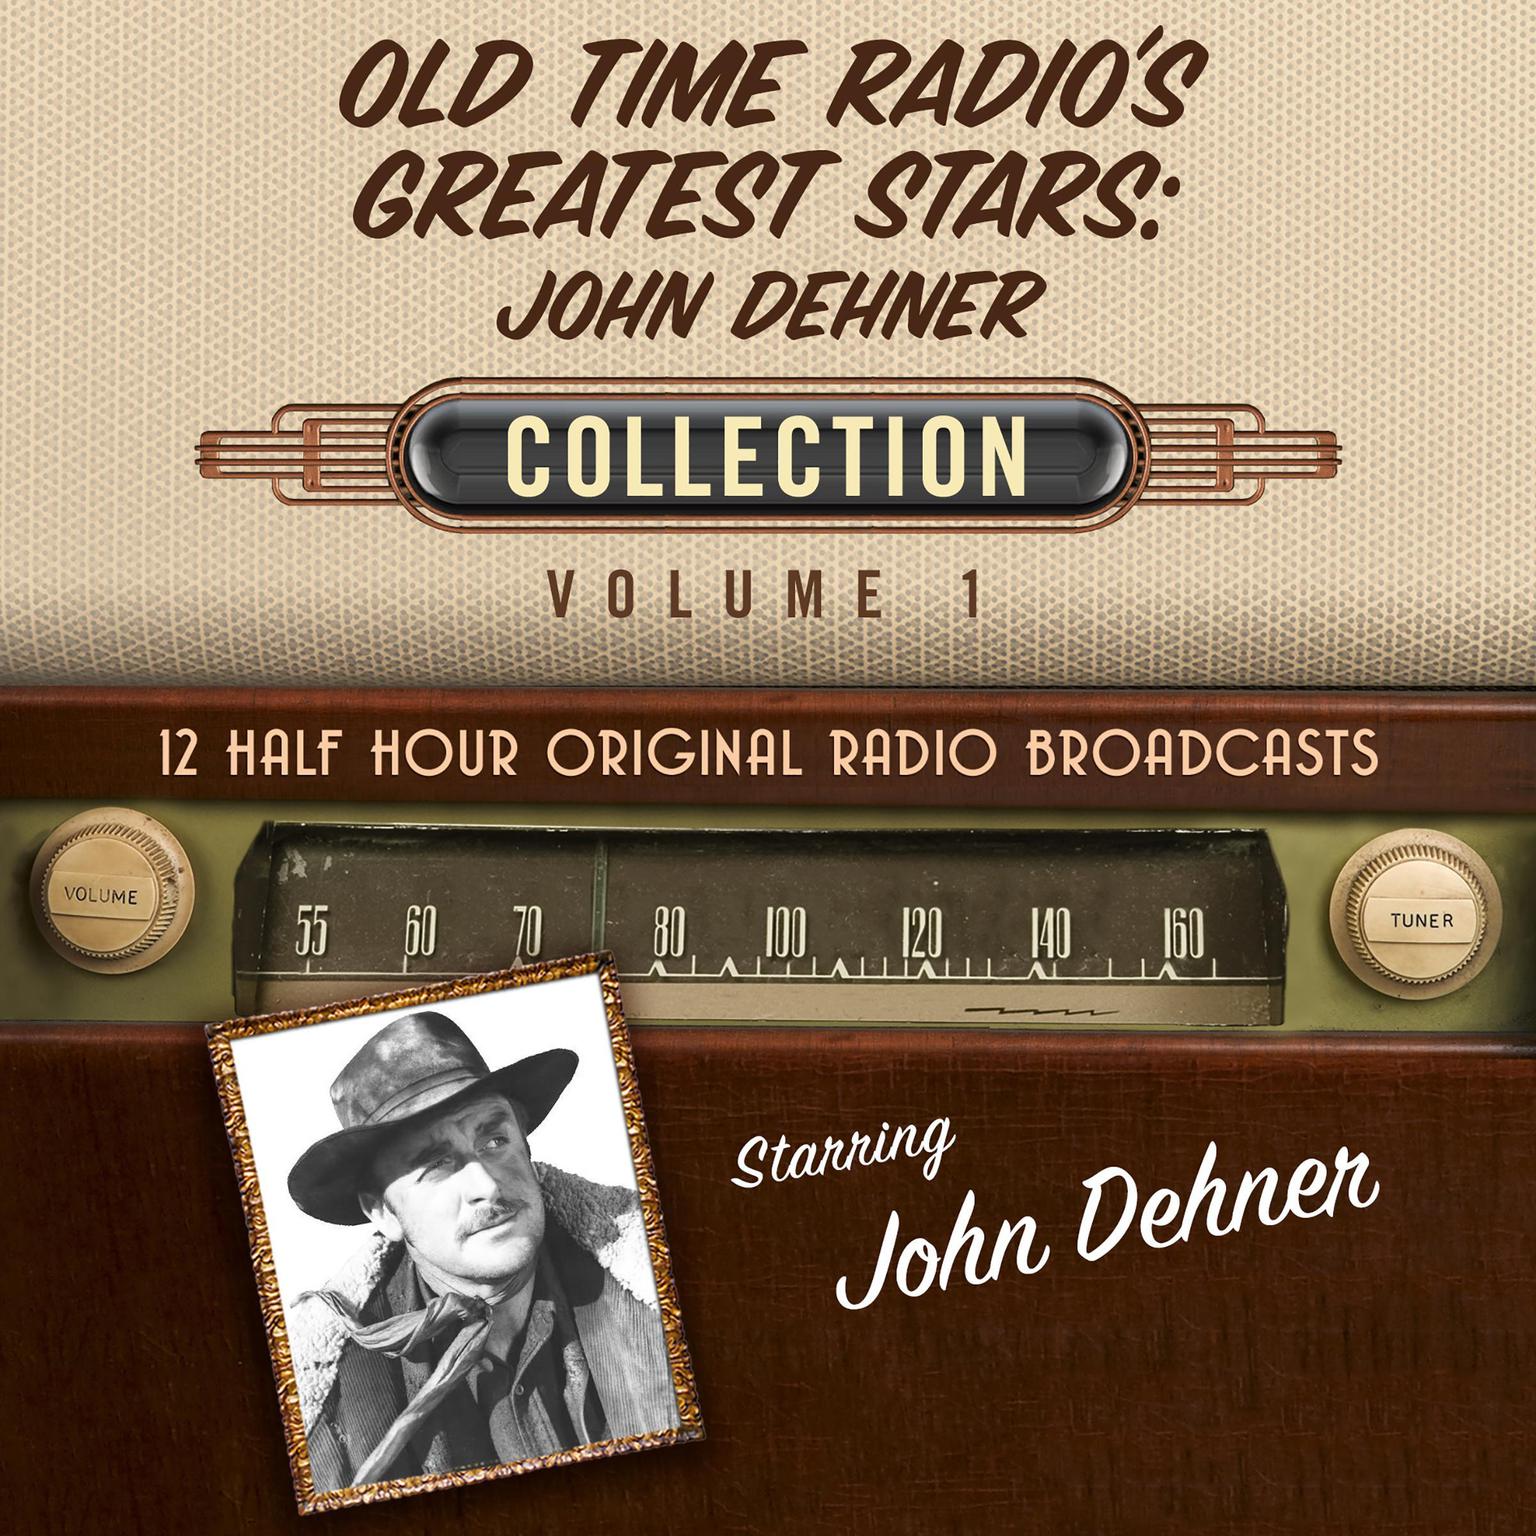 Old Time Radios Greatest Stars: John Dehner Collection 1 Audiobook, by Black Eye Entertainment